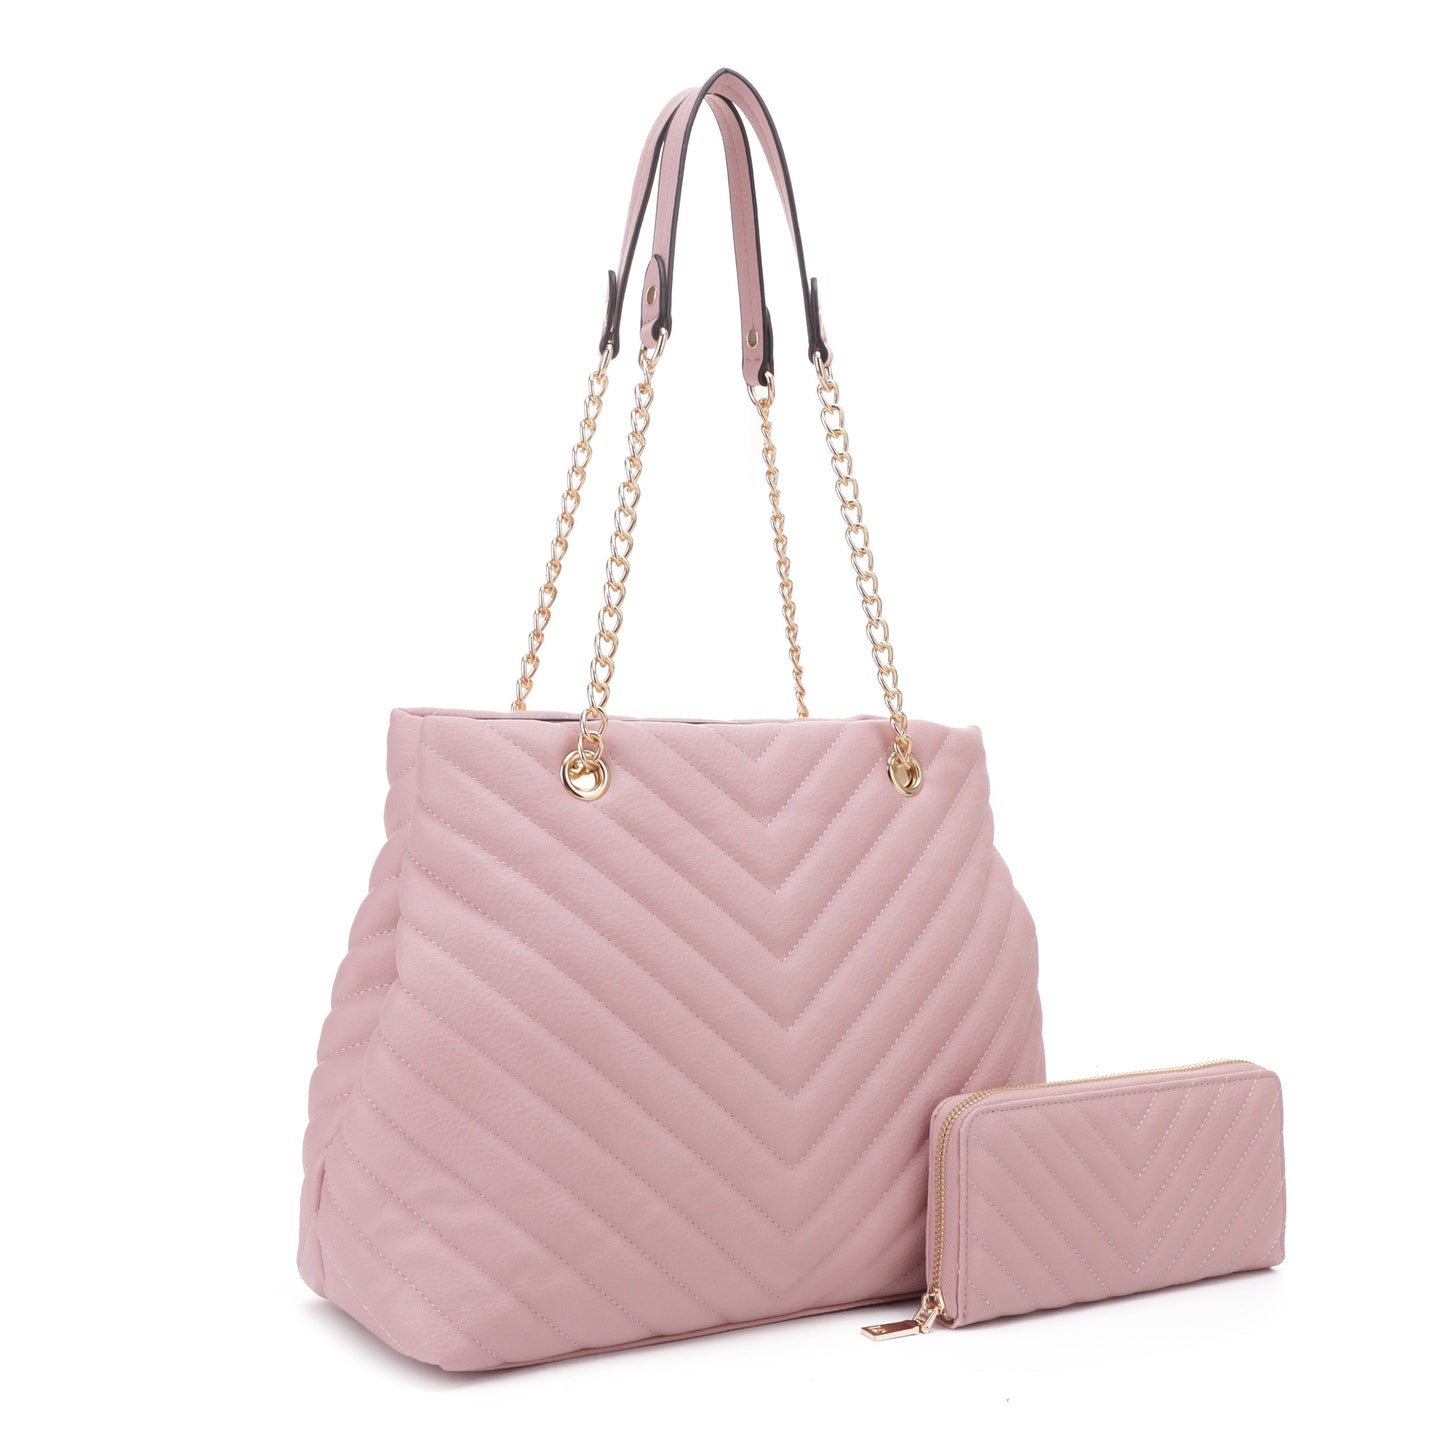 Chevron Quilted with Wallet Shoulder Bag